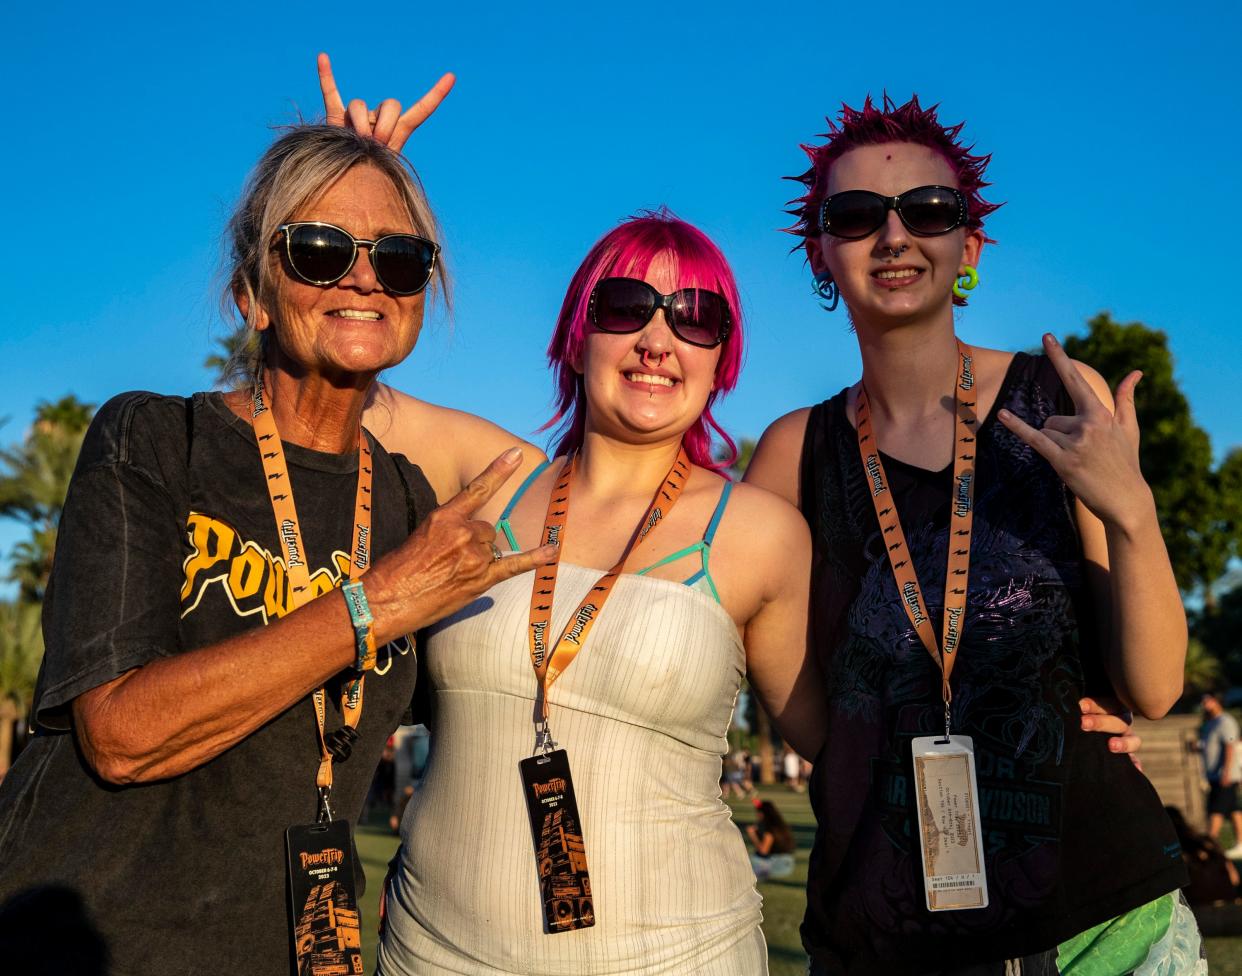 Kerri Yingst of Hobe Sound, Florida, poses for a photo with her 17-year-old grandkids Brooklyn Harper and Illy Pirylis of Cherry Hill, New Jersey, during the Power Trip Music Festival at the Empire Polo Club in Indio, Calif., Saturday, Oct. 7, 2023. Power Trip is the third festival Yingst has attended with her granddaughters, whom she refers to as her Òconcert buddies.Ó She hopes her granddaughters will continue the tradition and some day take their own granddaughters to rock shows.